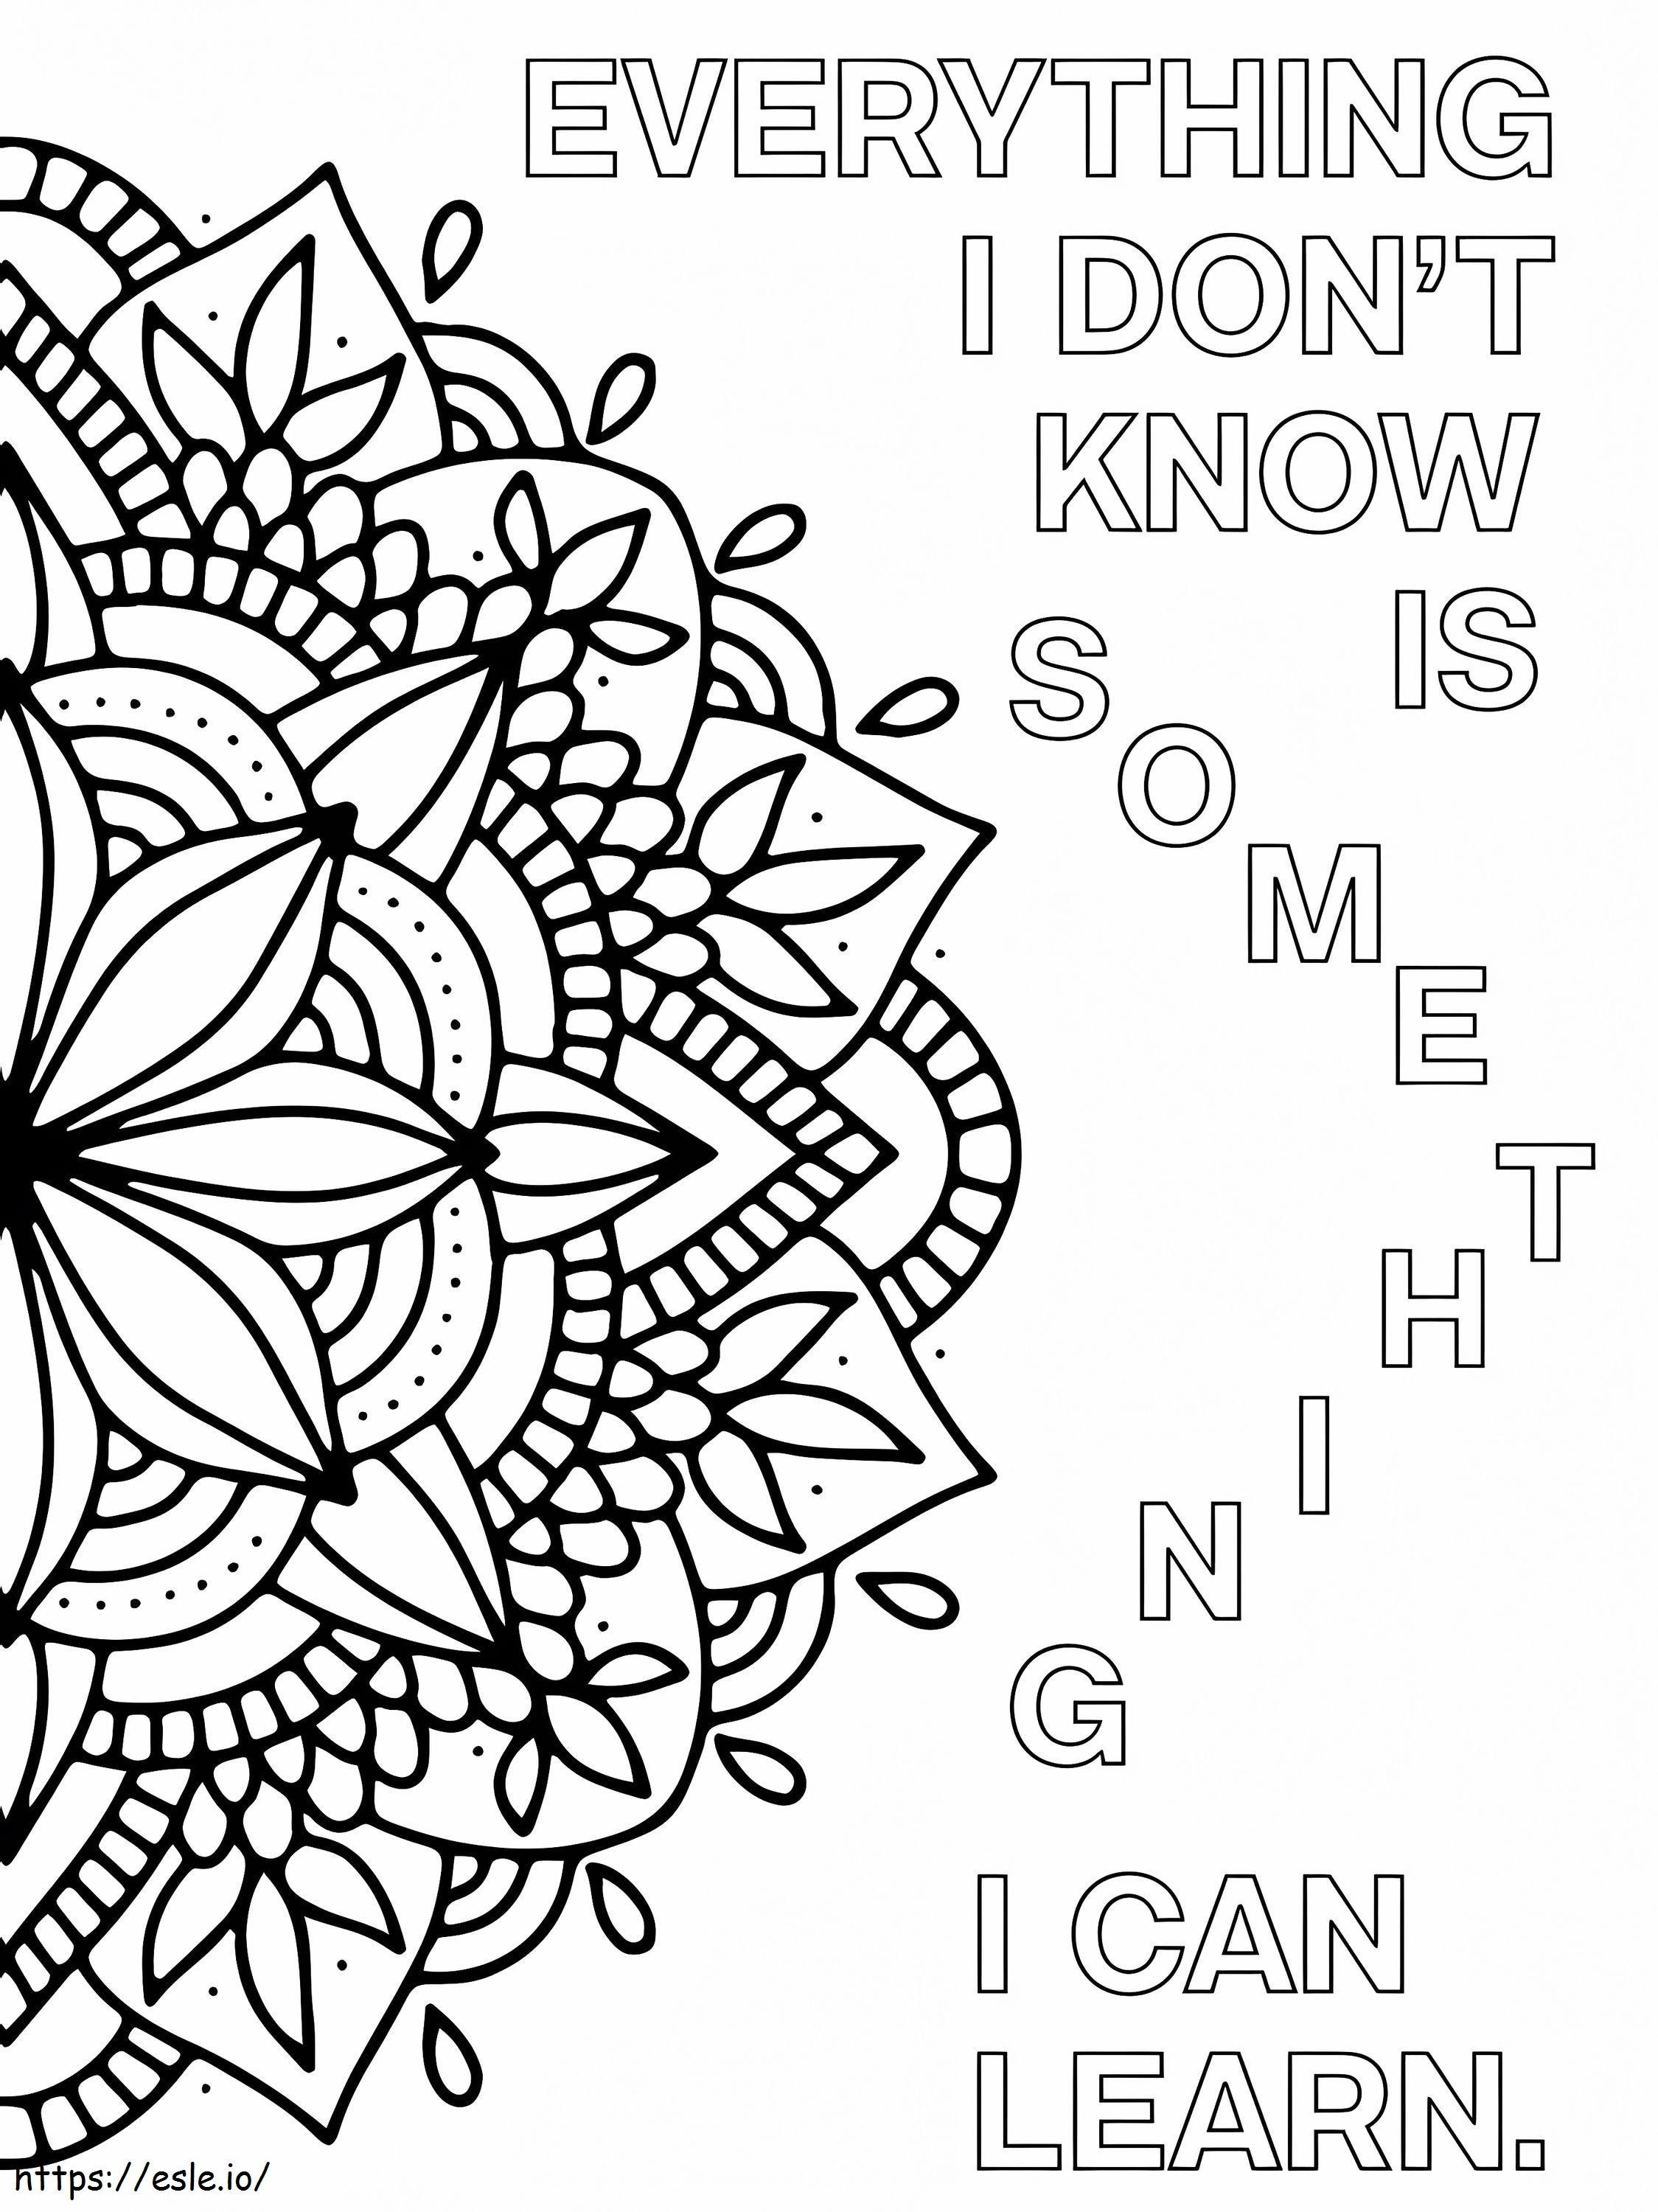 Everything I Dont Know Is Something I Can Learn coloring page